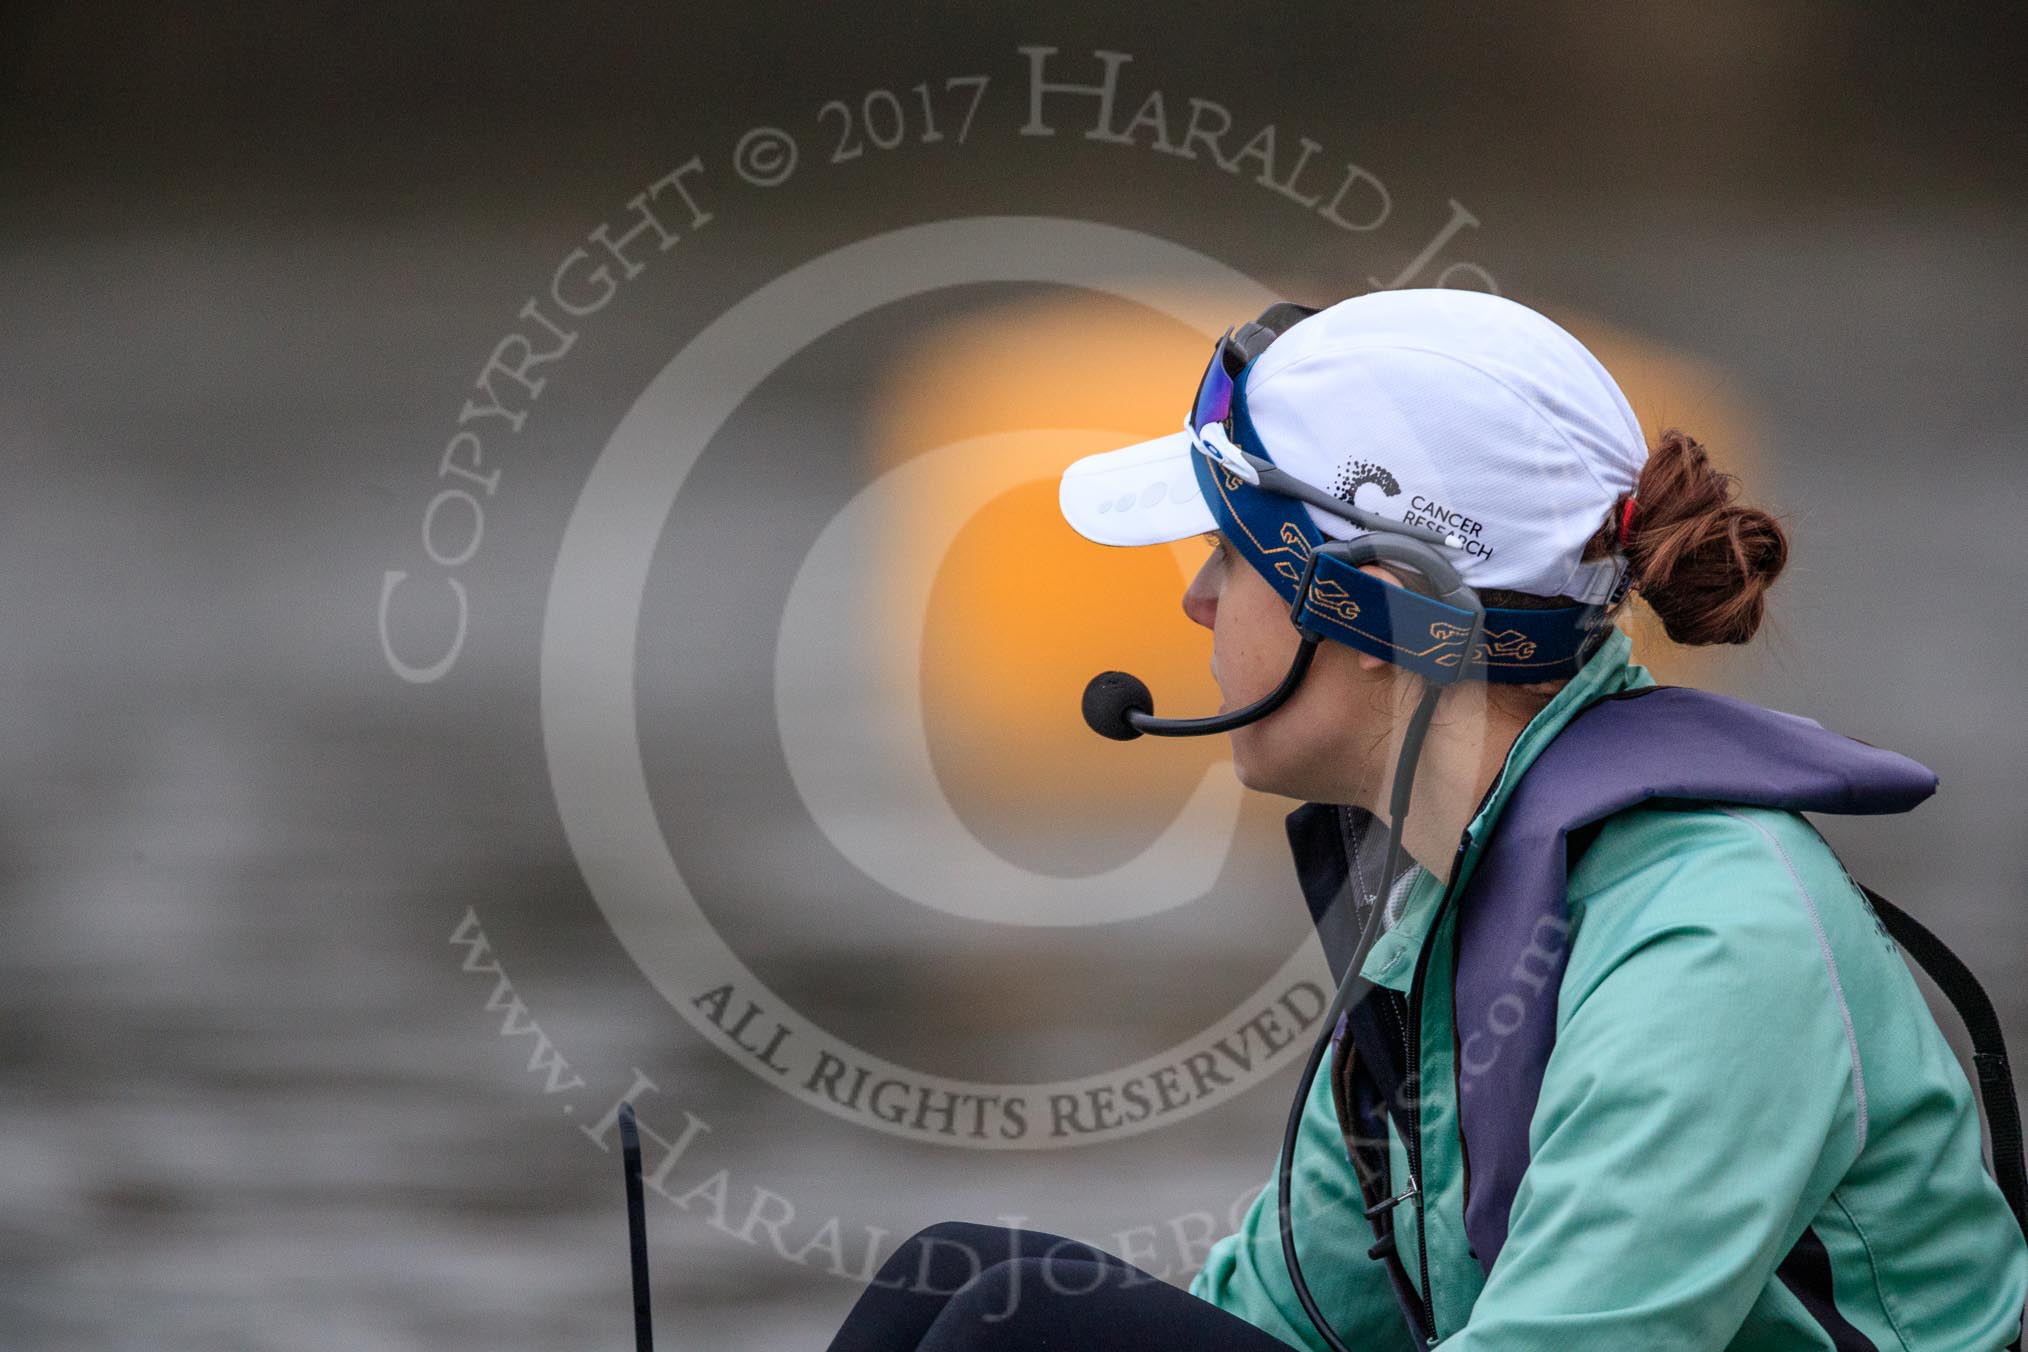 The Cancer Research UK Women's Boat Race 2018: Cambridge cox Sophie Shapter before the start of the Women's Bpat Race.
River Thames between Putney Bridge and Mortlake,
London SW15,

United Kingdom,
on 24 March 2018 at 16:21, image #146